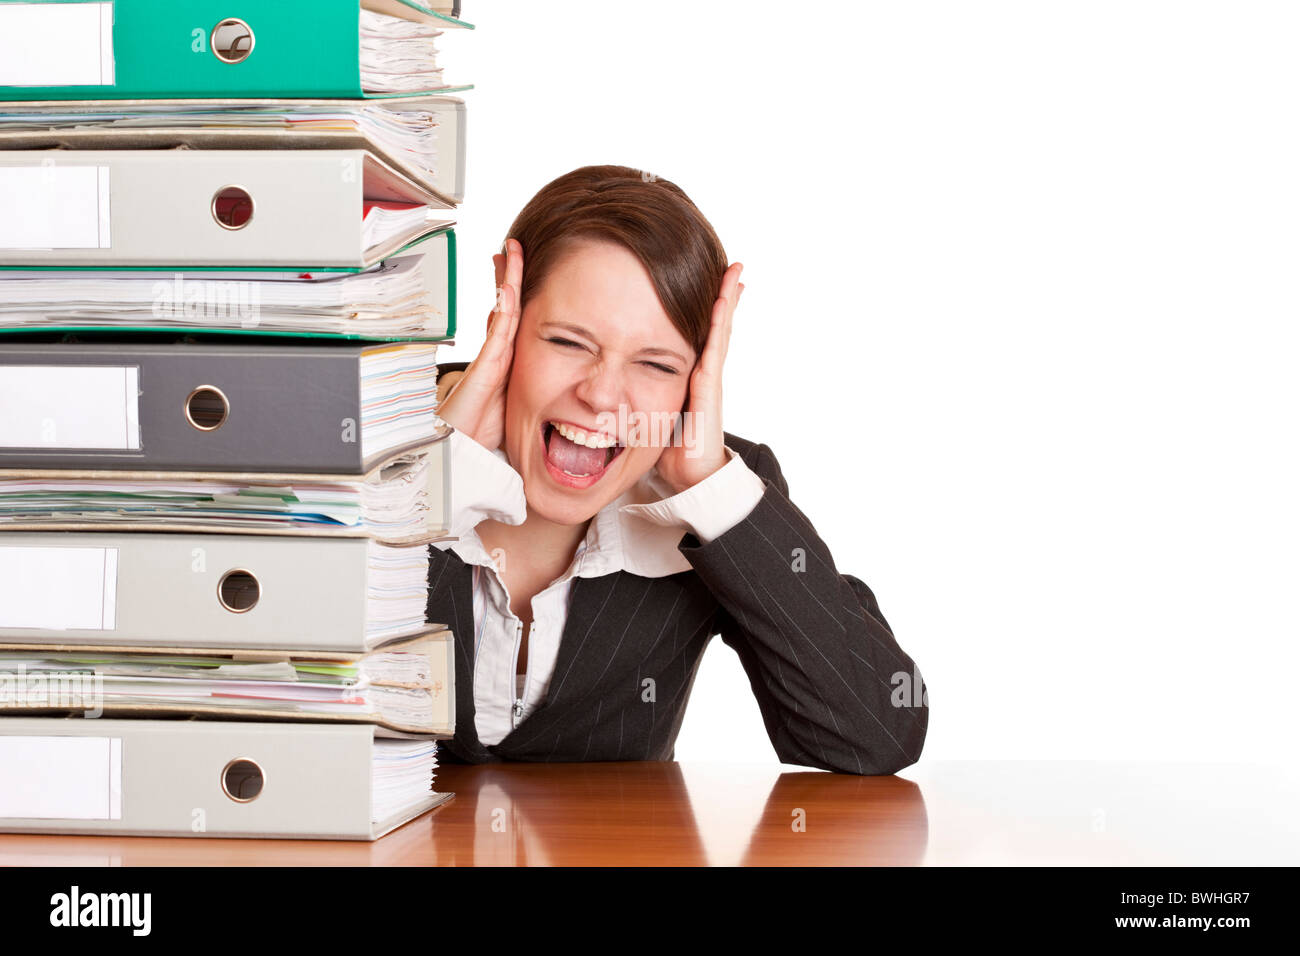 Frustrated business woman cries in office behind behind a folder stack. Isolated on white background. Stock Photo